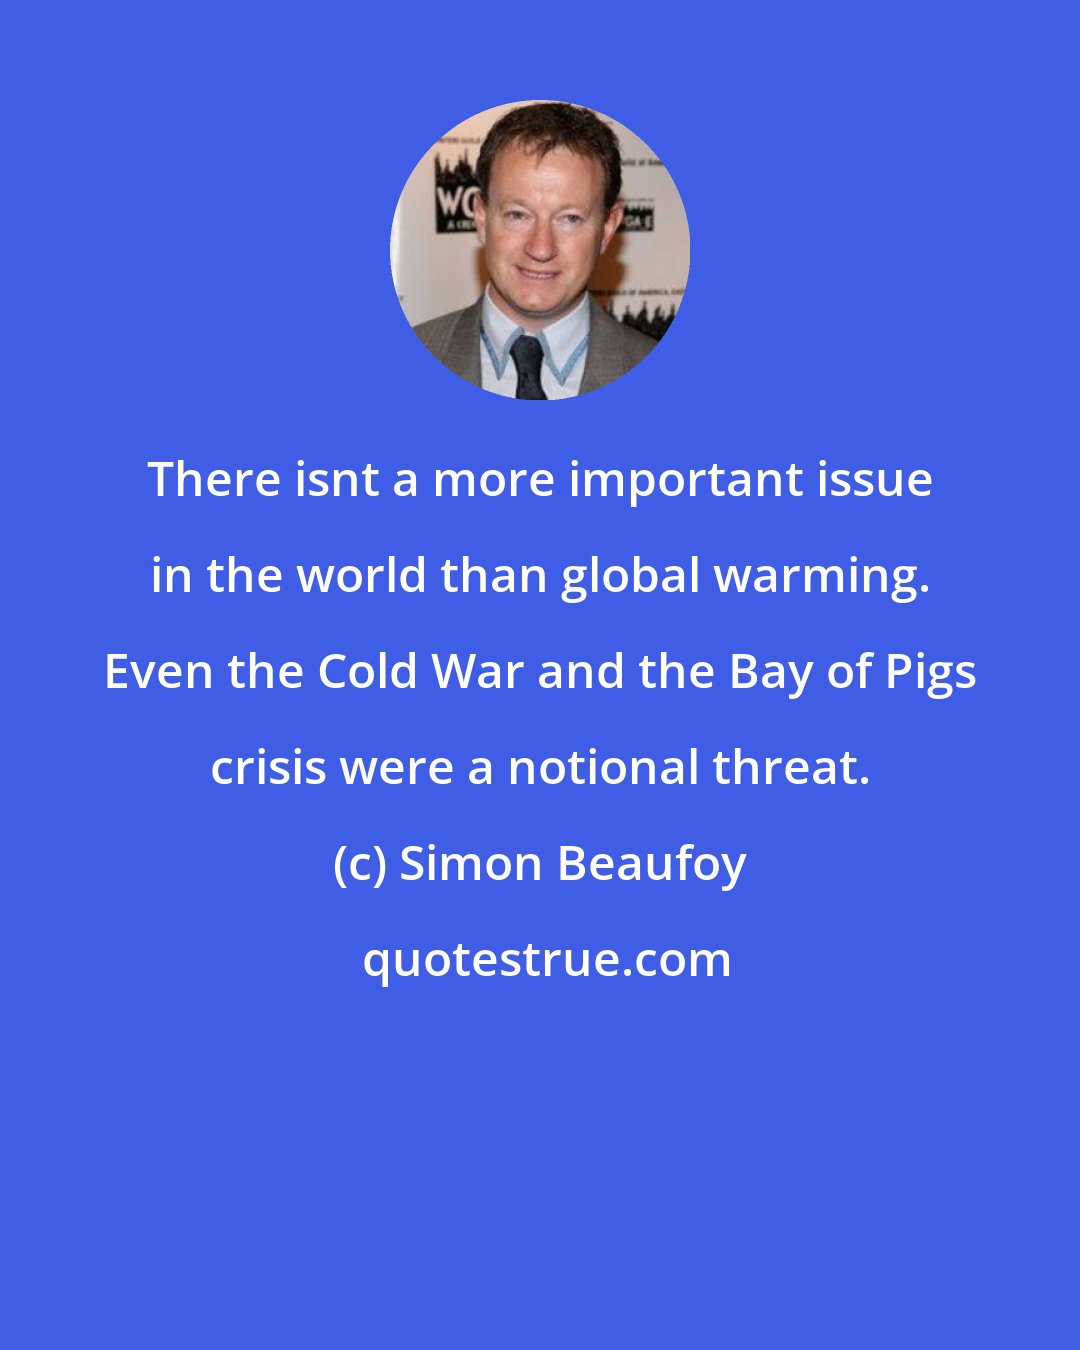 Simon Beaufoy: There isnt a more important issue in the world than global warming. Even the Cold War and the Bay of Pigs crisis were a notional threat.